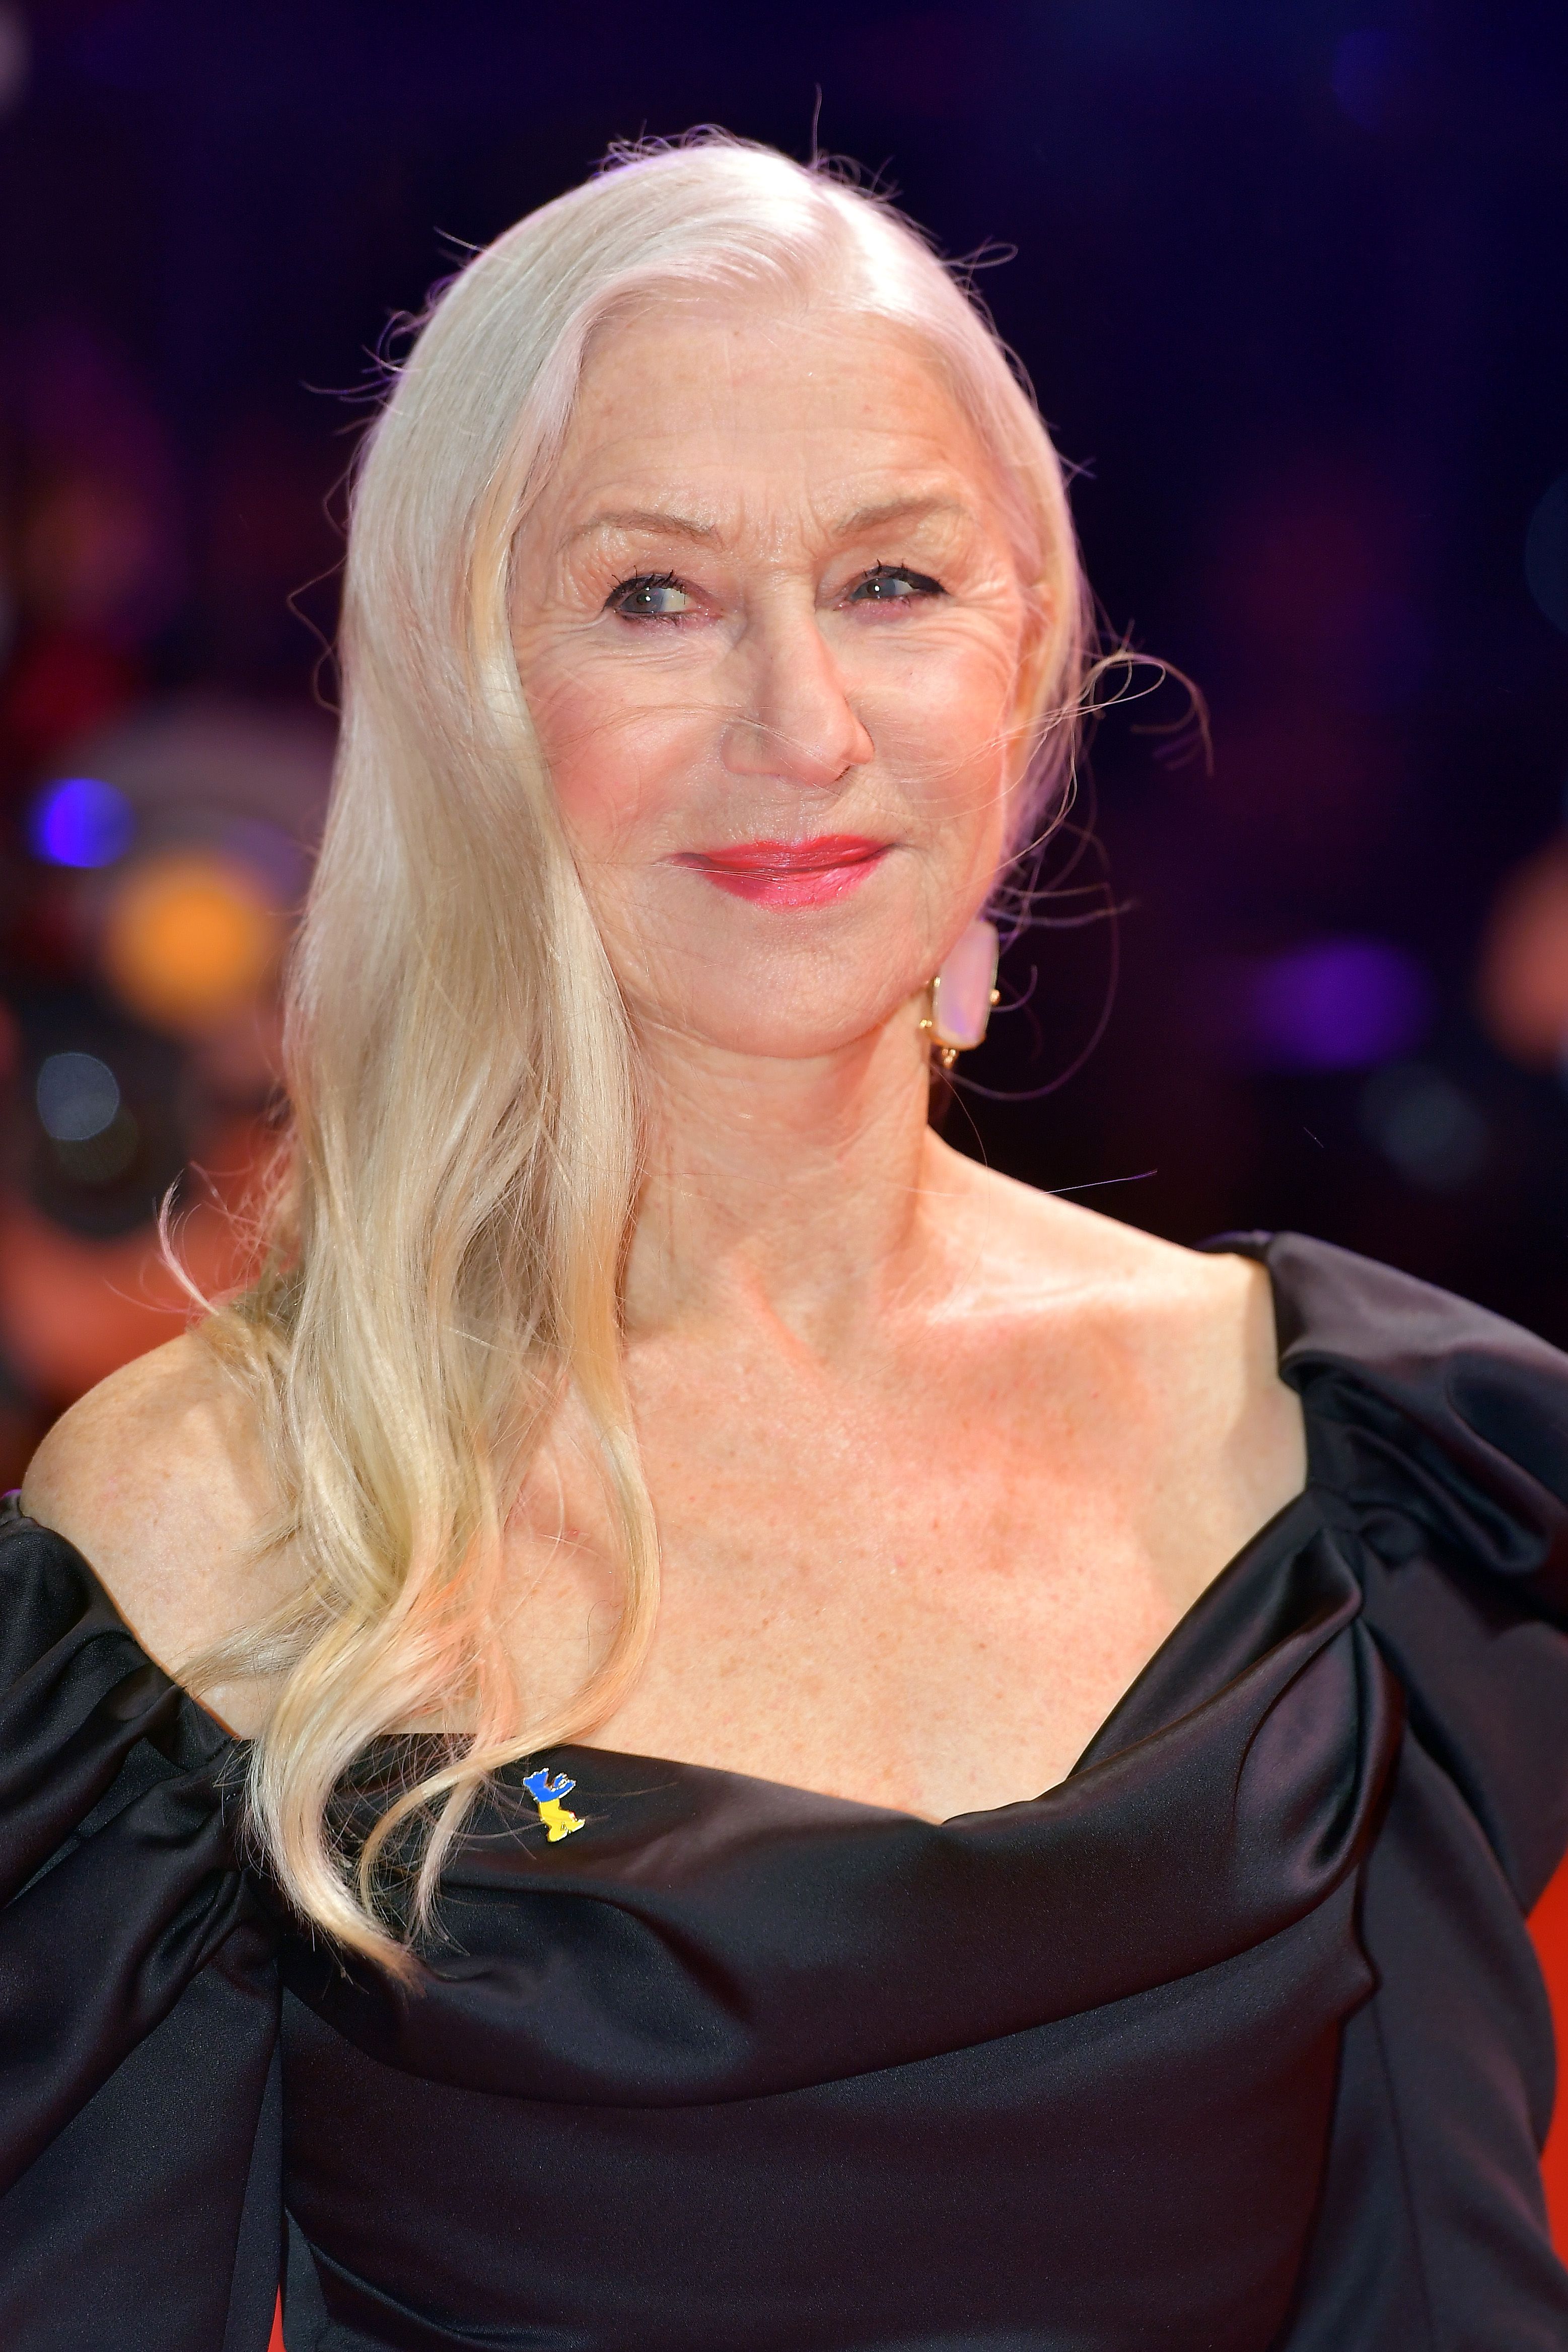 Helen Mirren, 77, Gives Cheeky Response to Being Called a Nudist pic